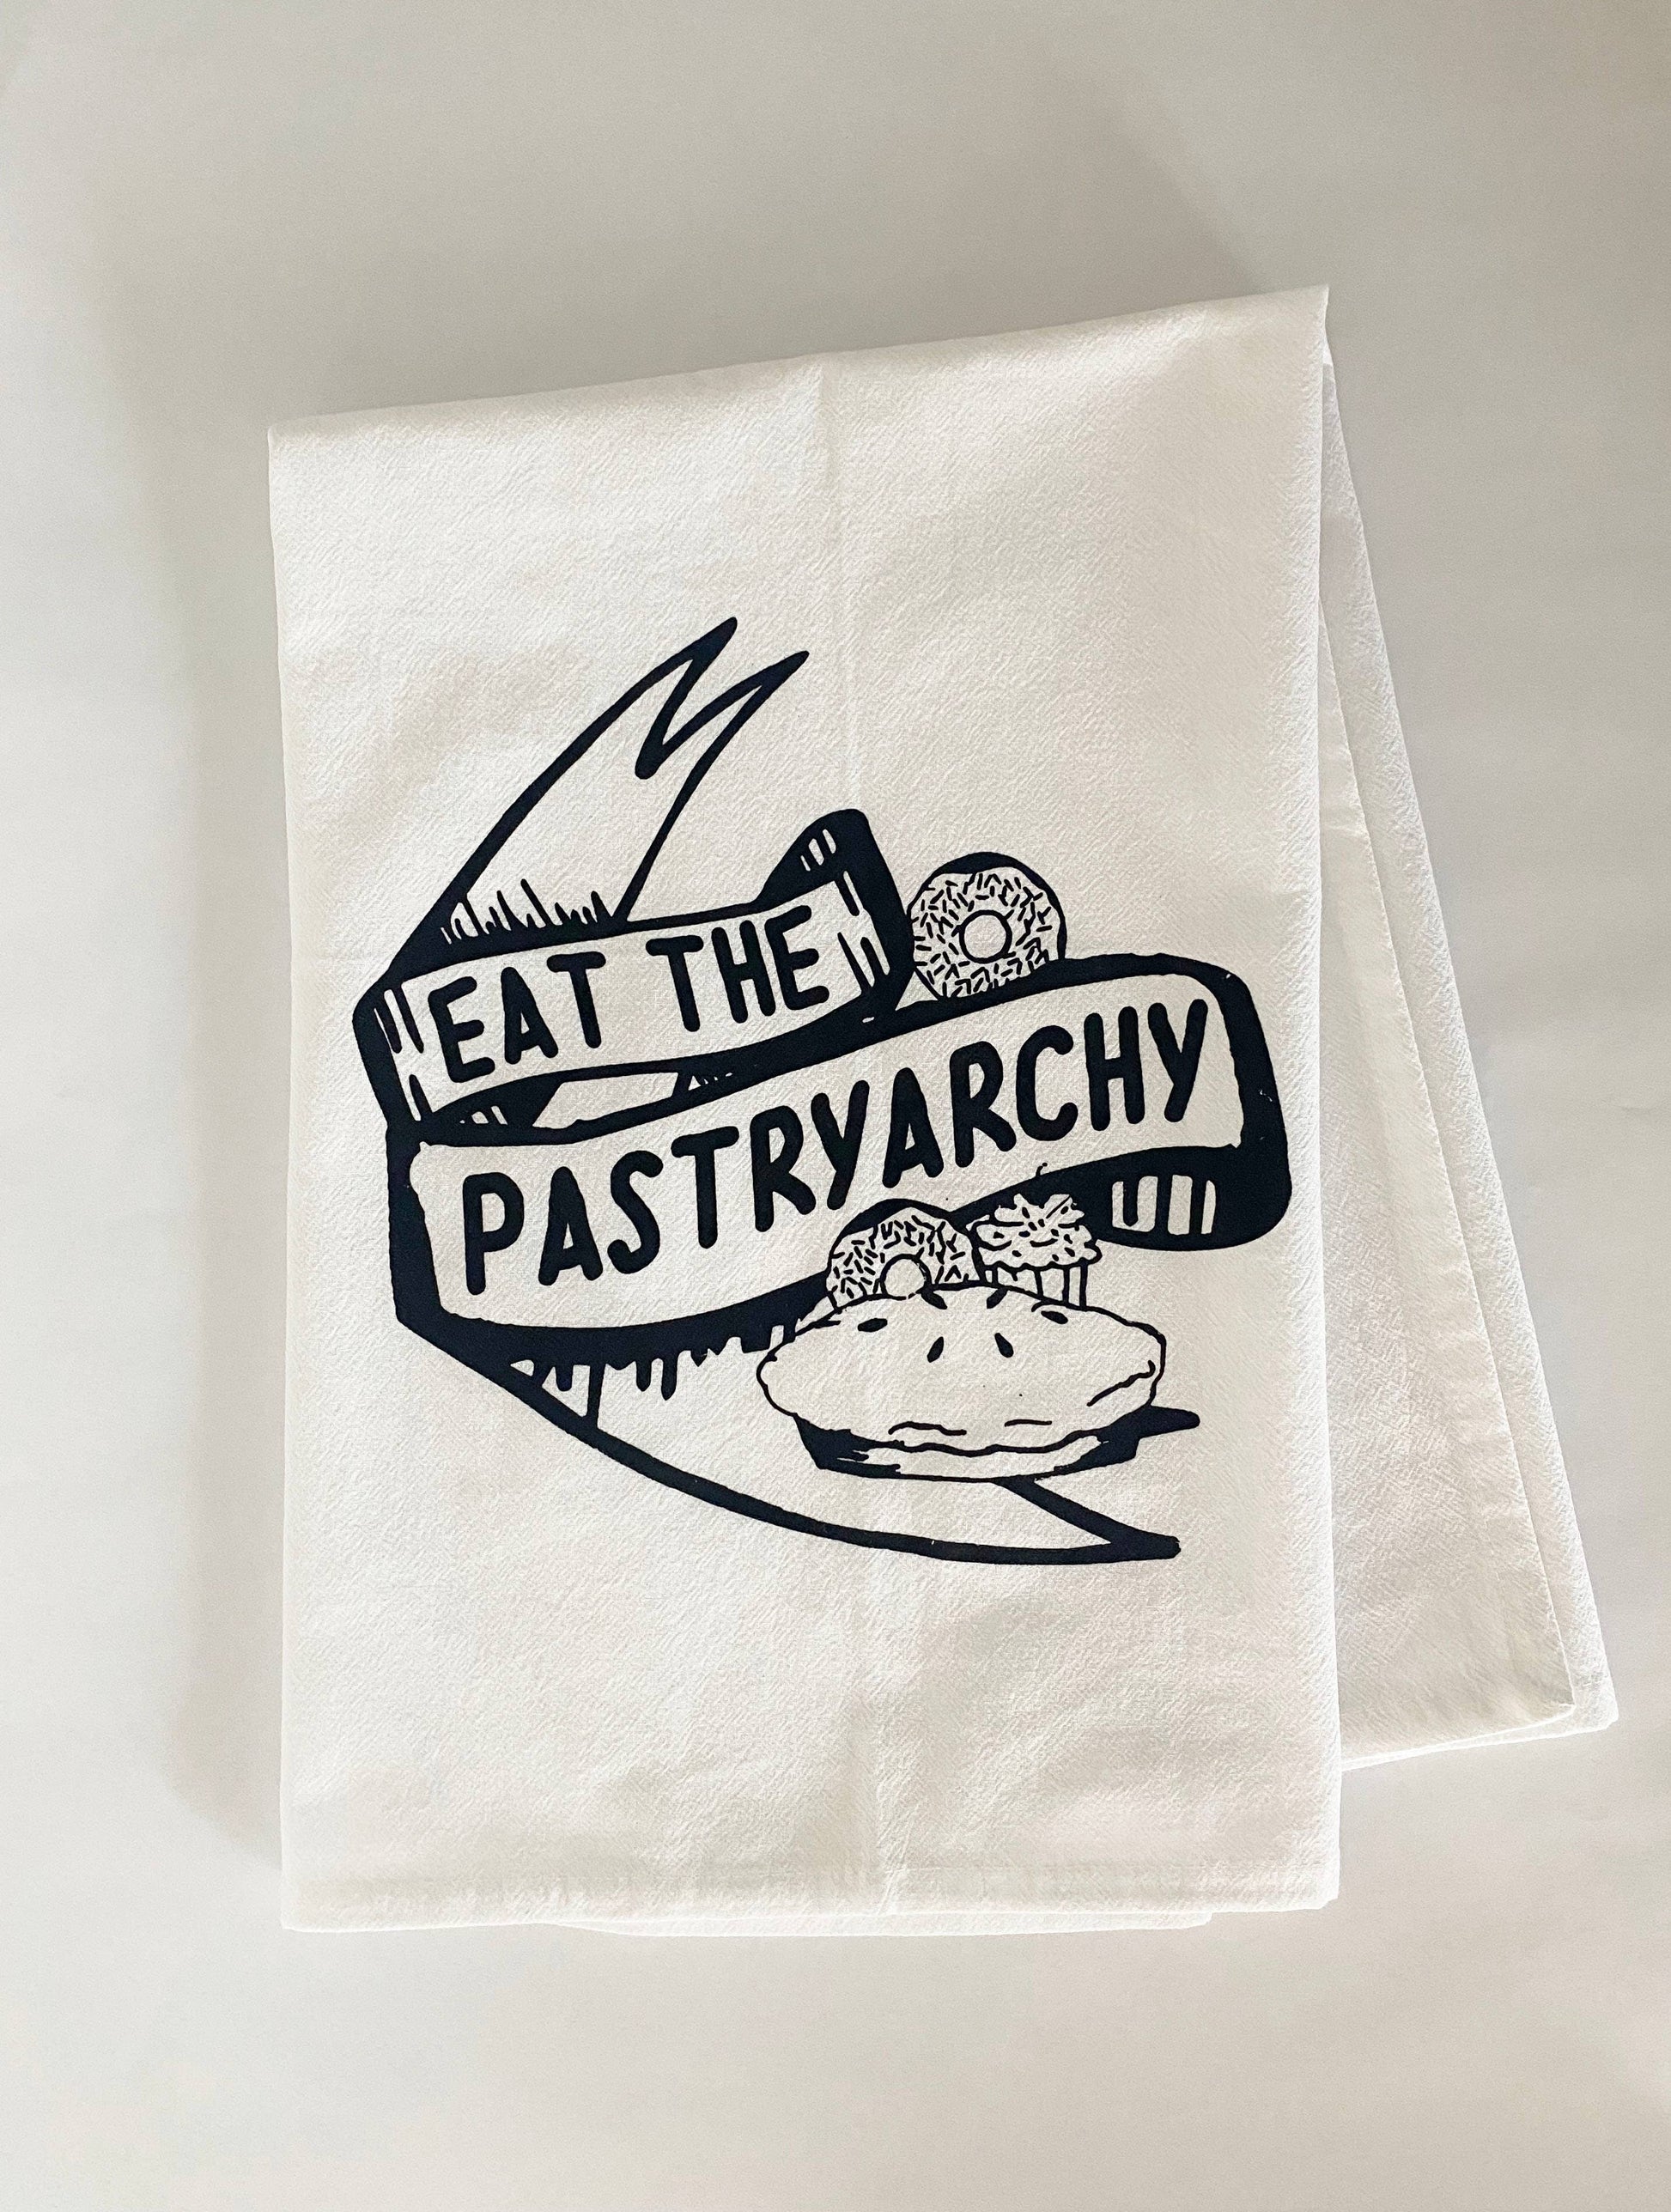 The Kimteny Cloth Dish Towels Are on Sale for $1 Each on